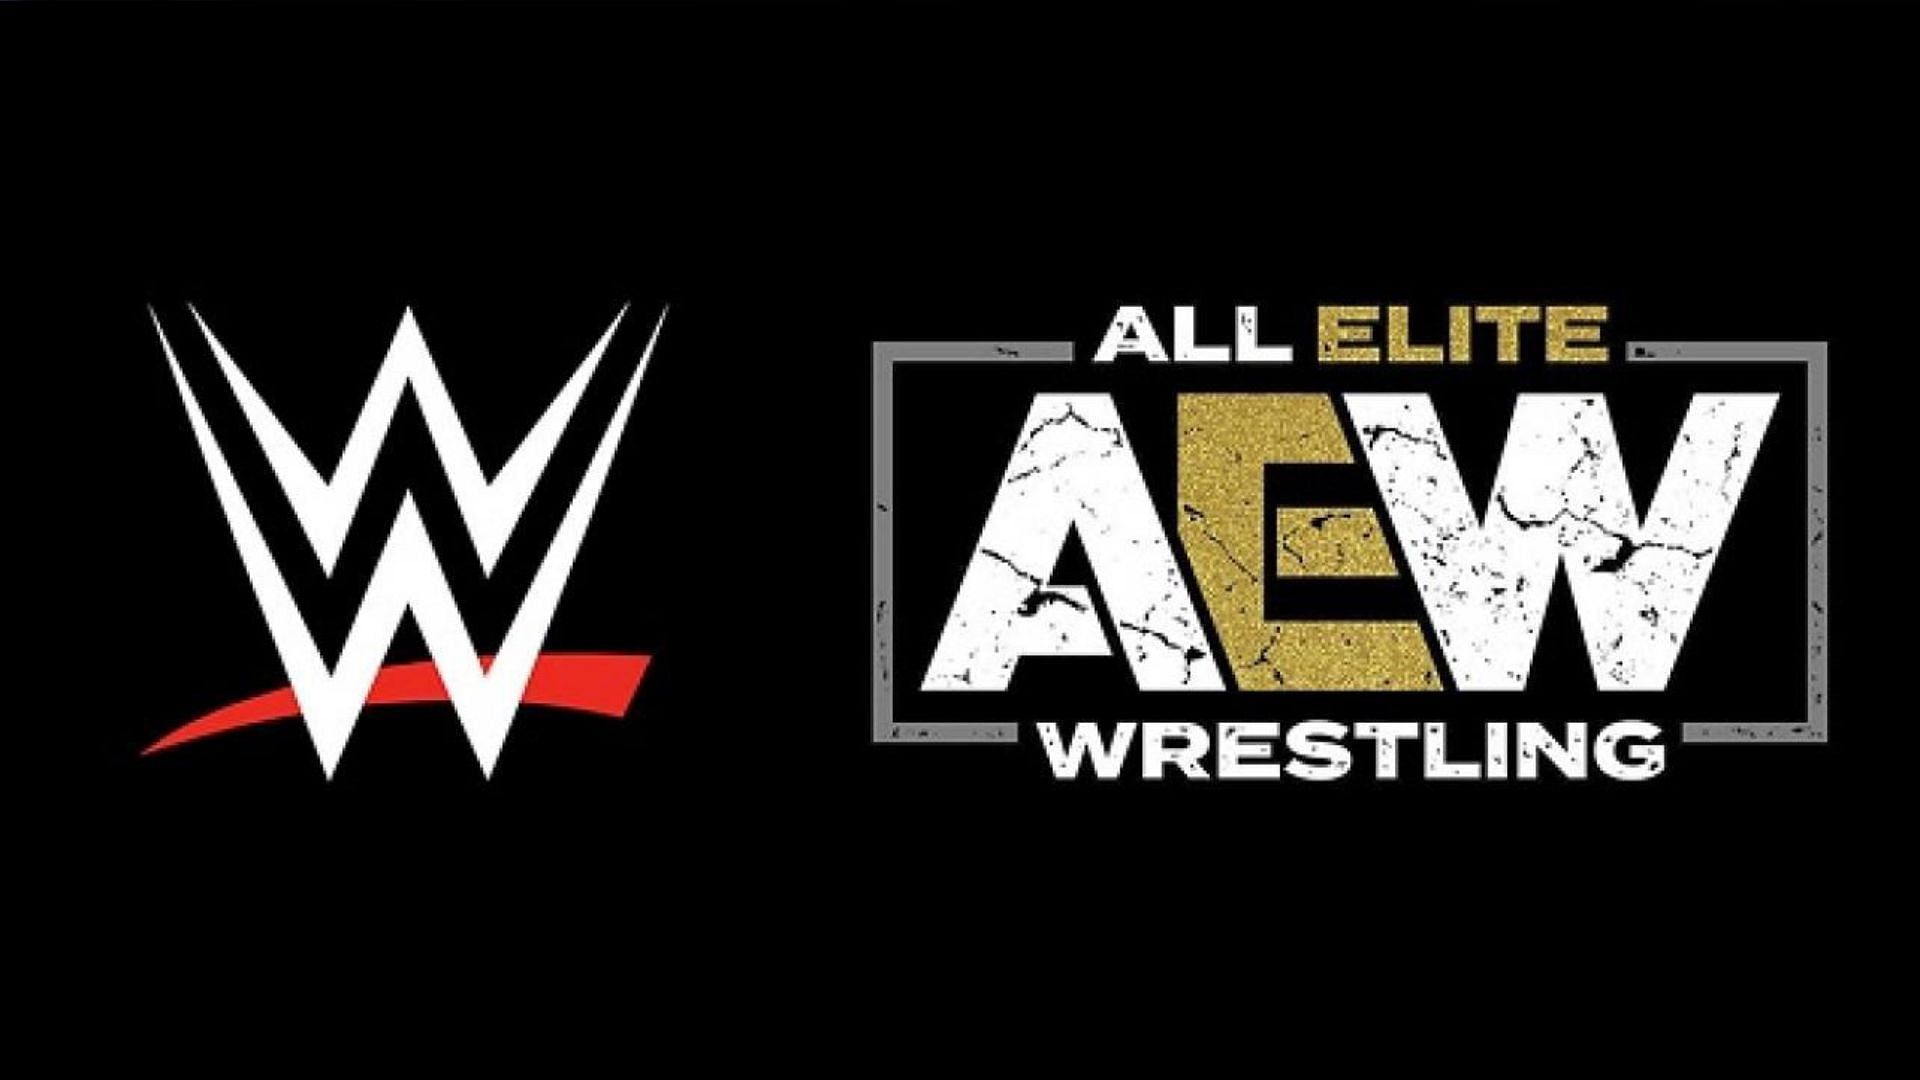 WWE Superstar referenced on AEW Dynamite